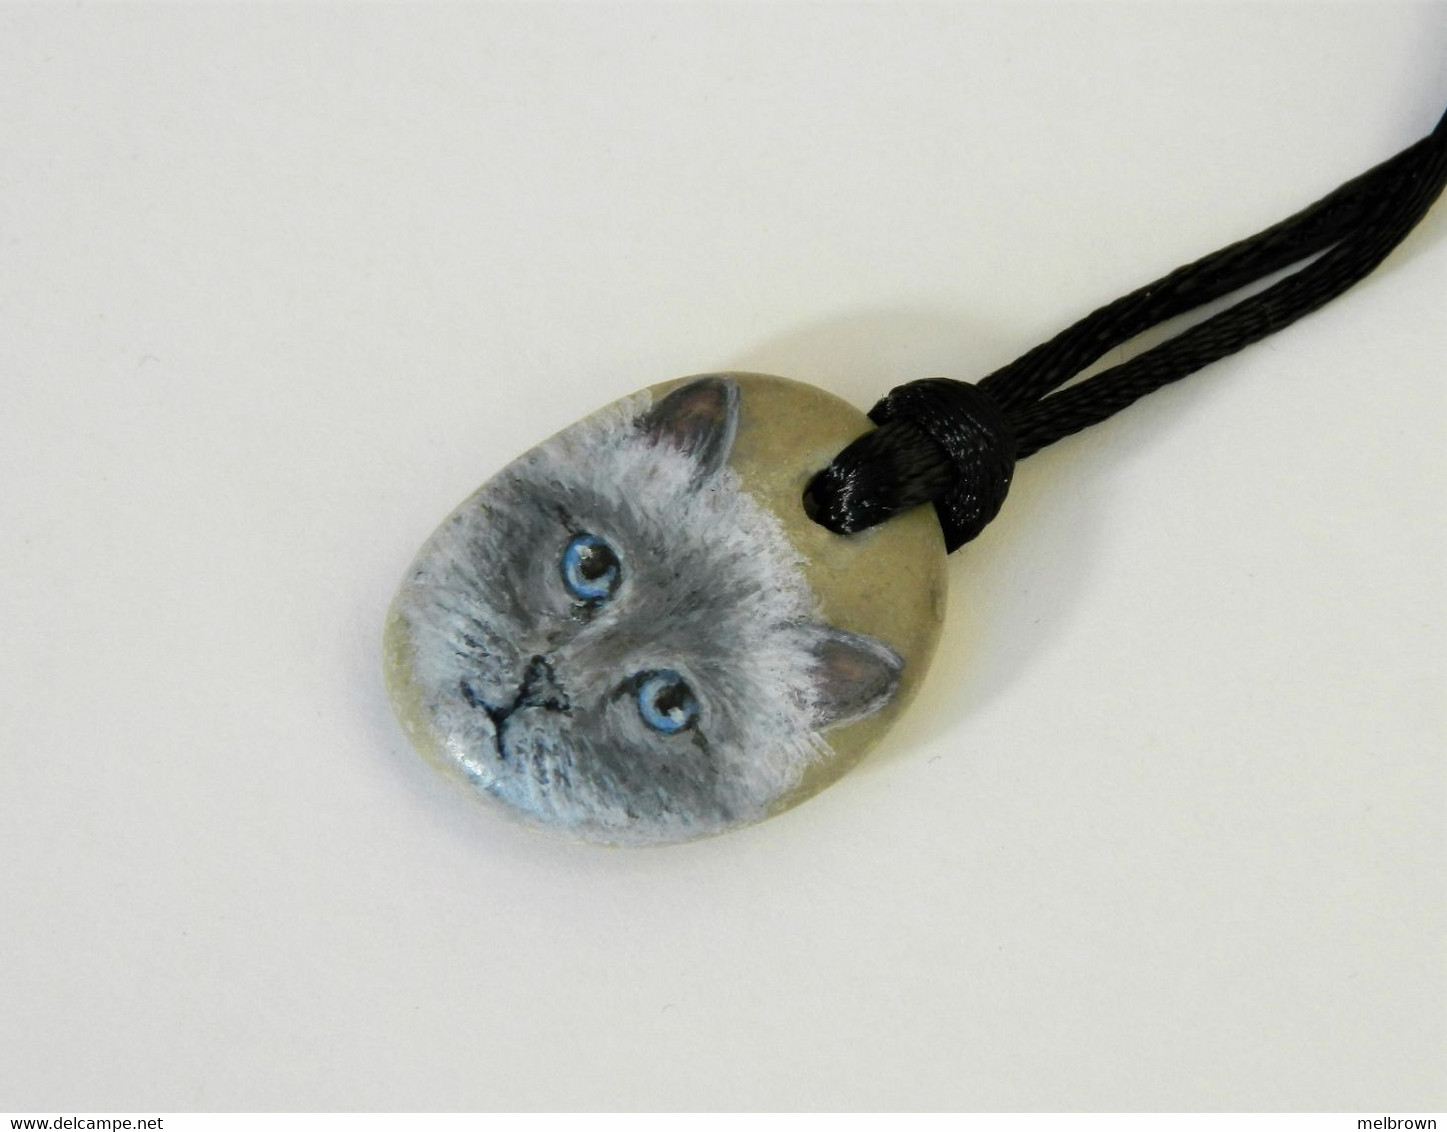 Himalayan Cat Hand Painted On A Small Beach Stone Pendant - Colgantes